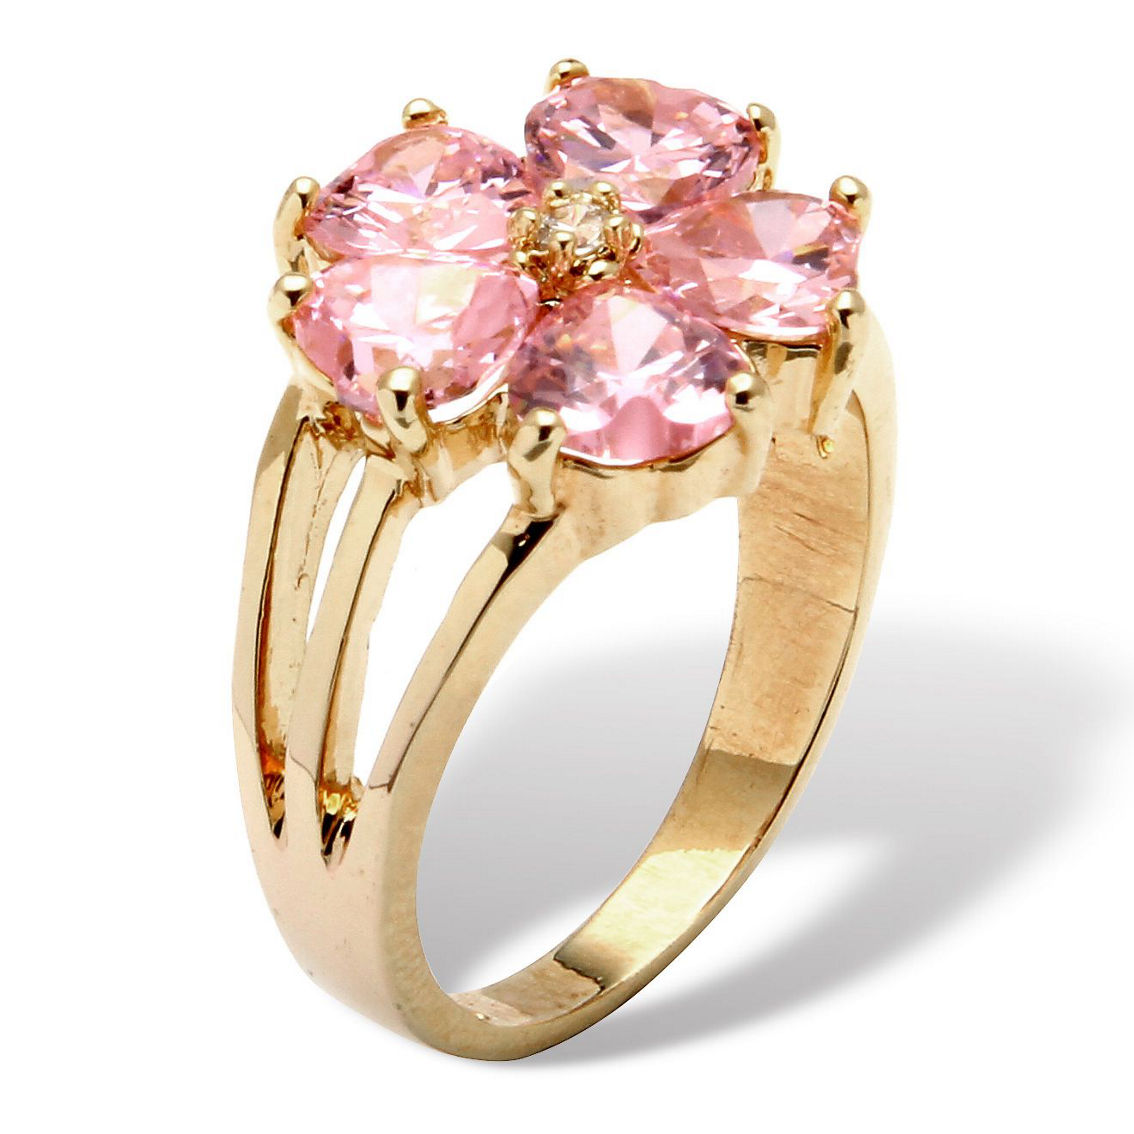 4 TCW Heart-Shaped Pink Cubic Zirconia Yellow Gold-Plated Flower Ring - Image 2 of 5